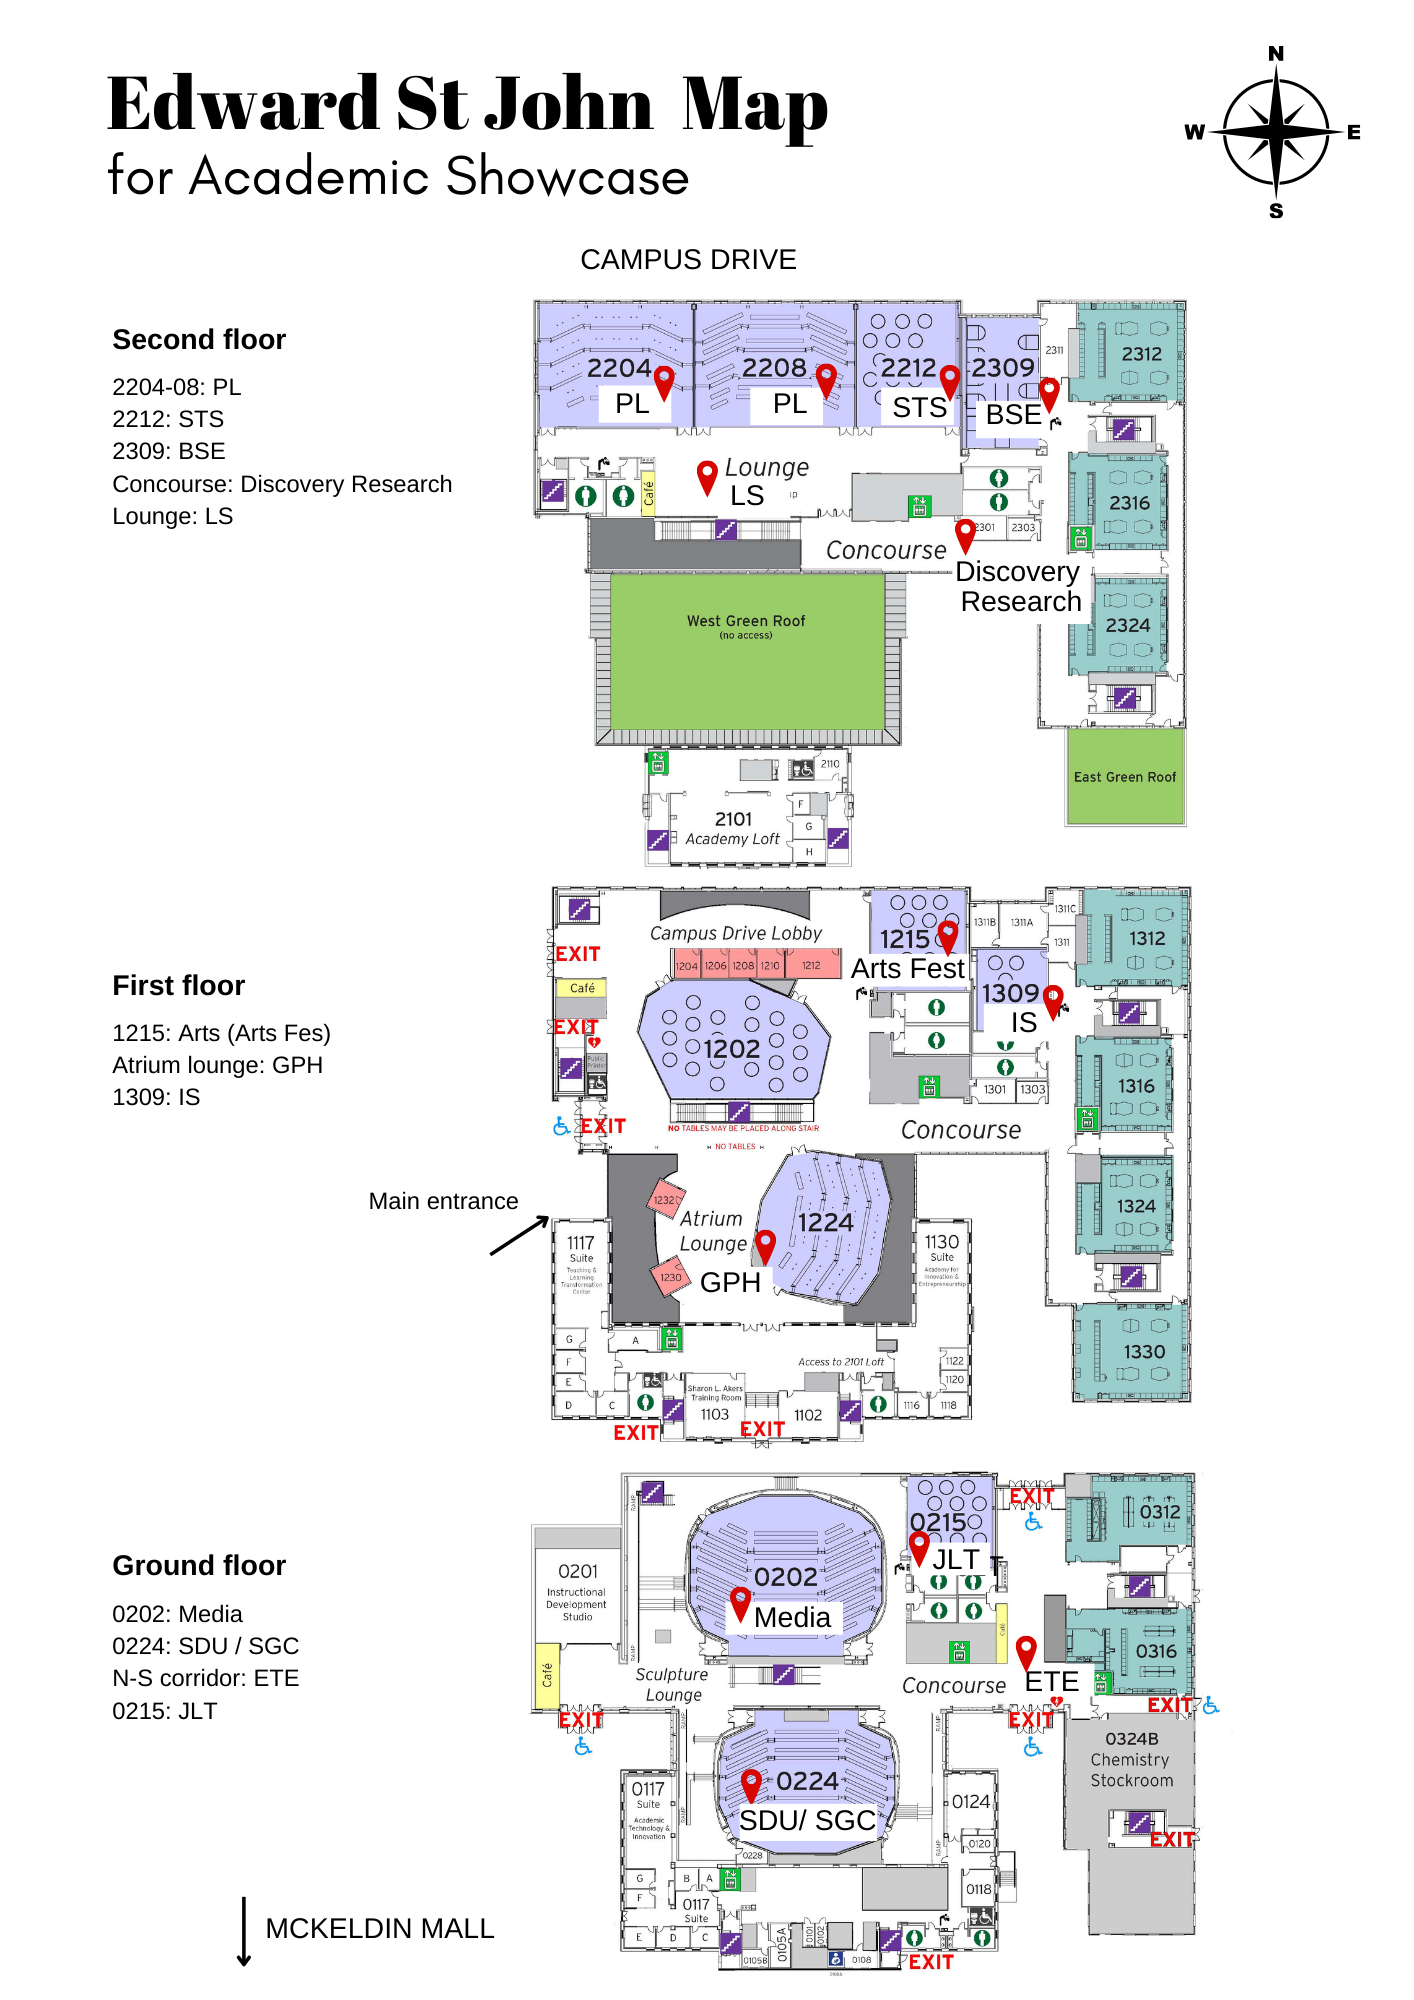 map of Edward St. John building with room assignments